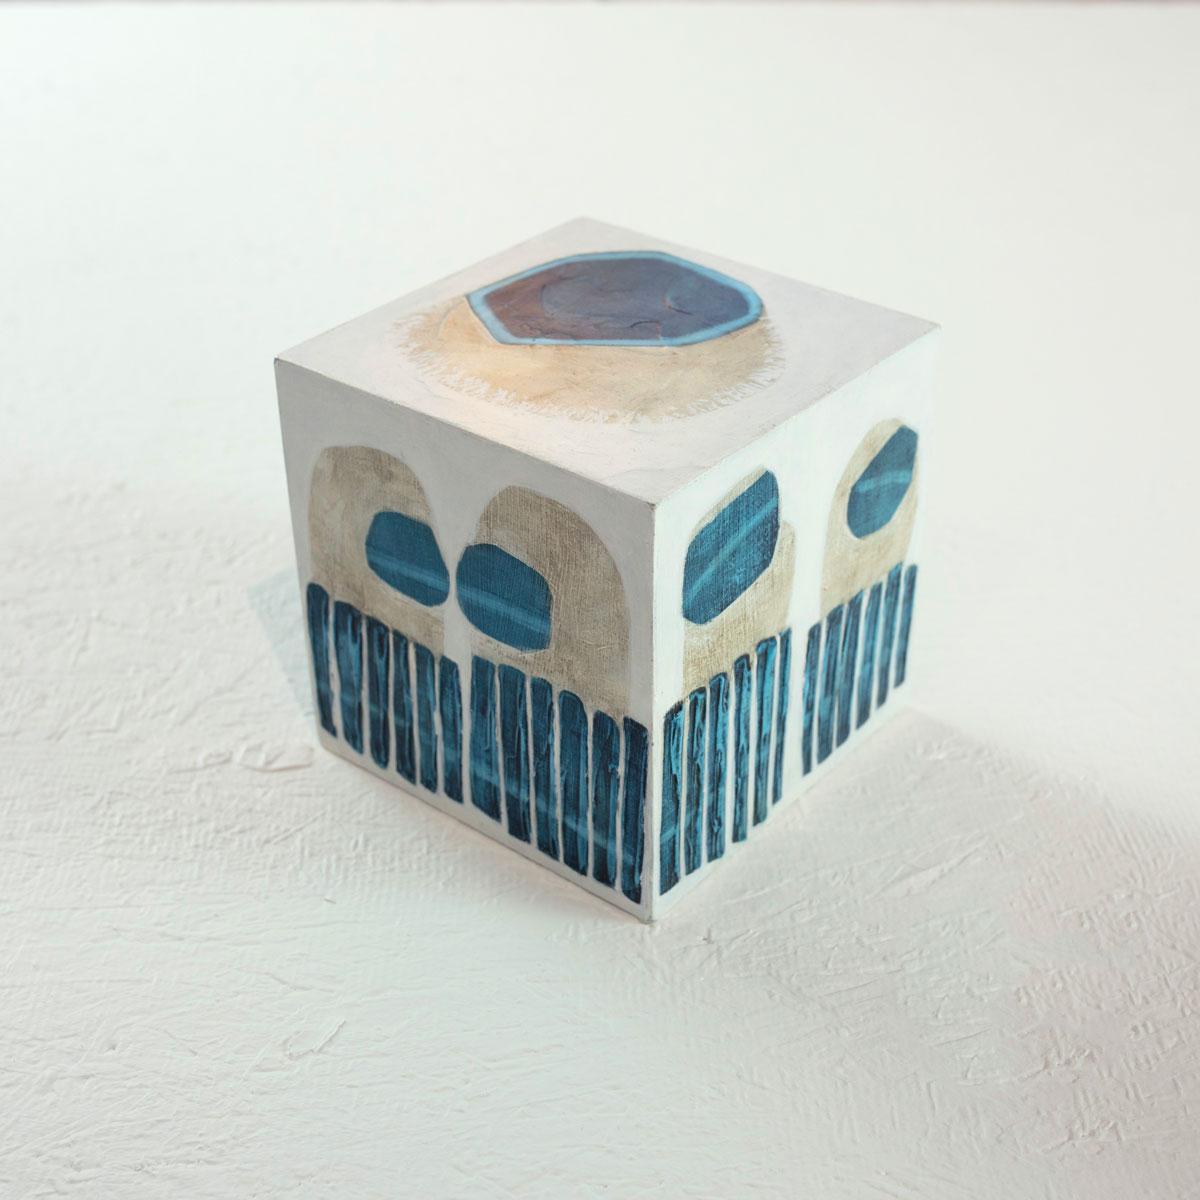 Sofie Swann Abstract Painting - "Little Swann 6" Painted Wooden Cube Sculpture